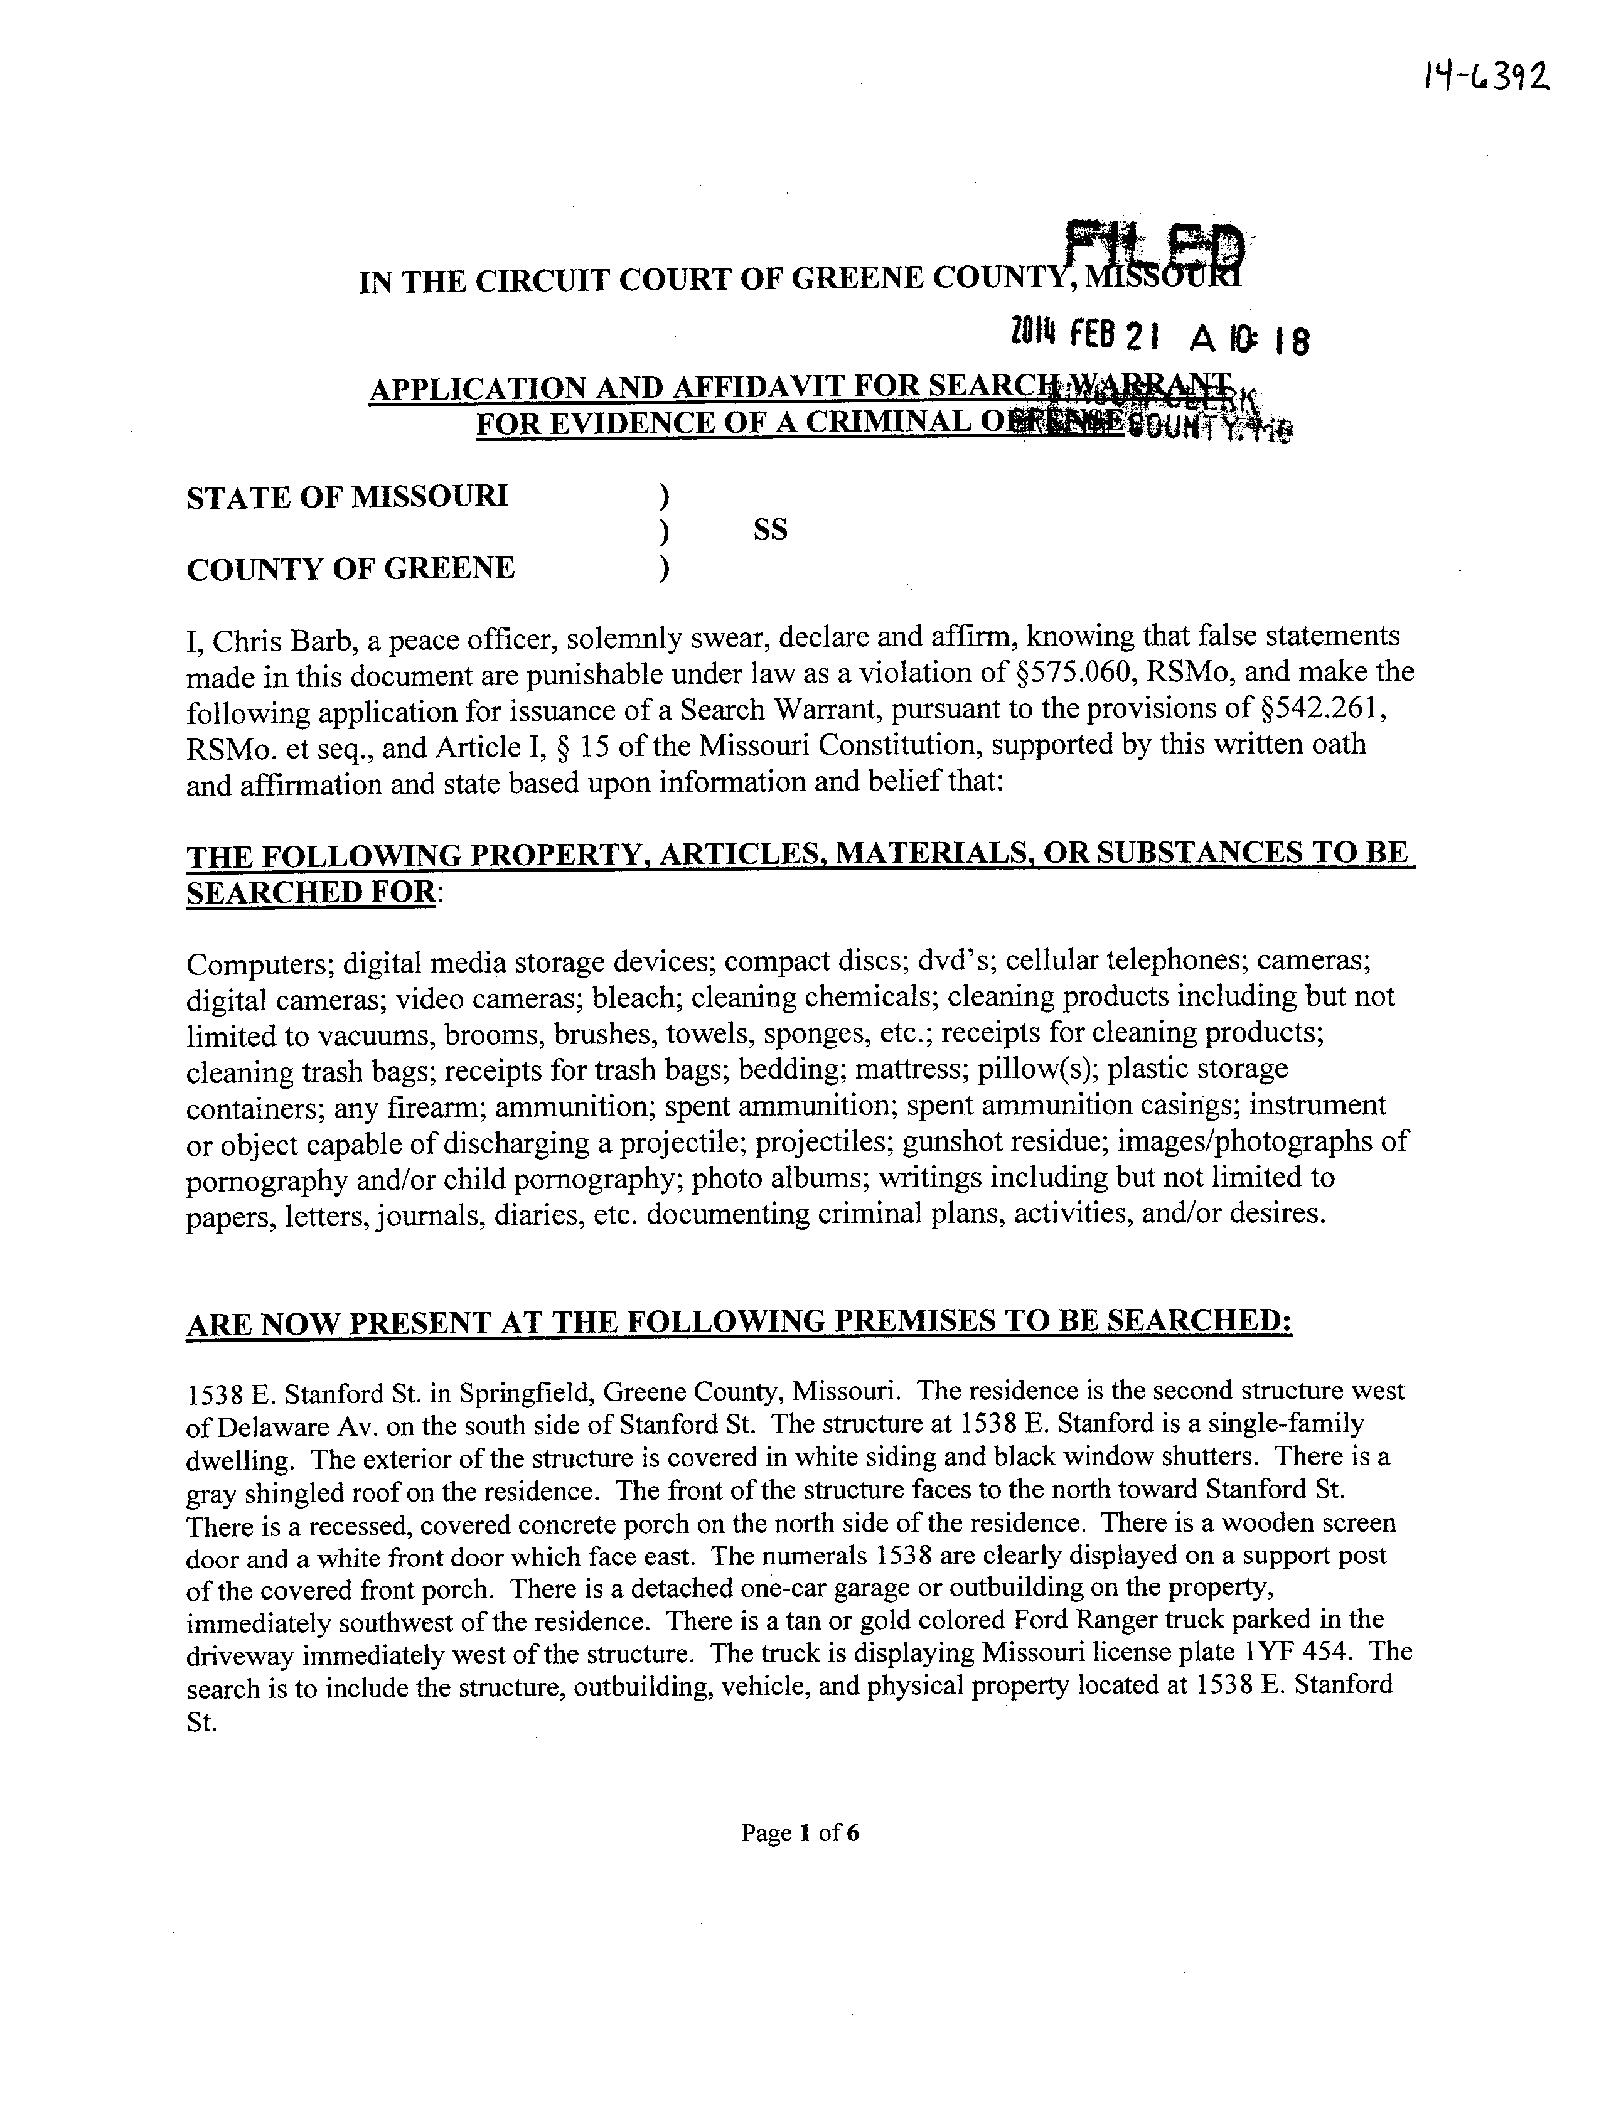 Copy of Search Warrant Return08.png